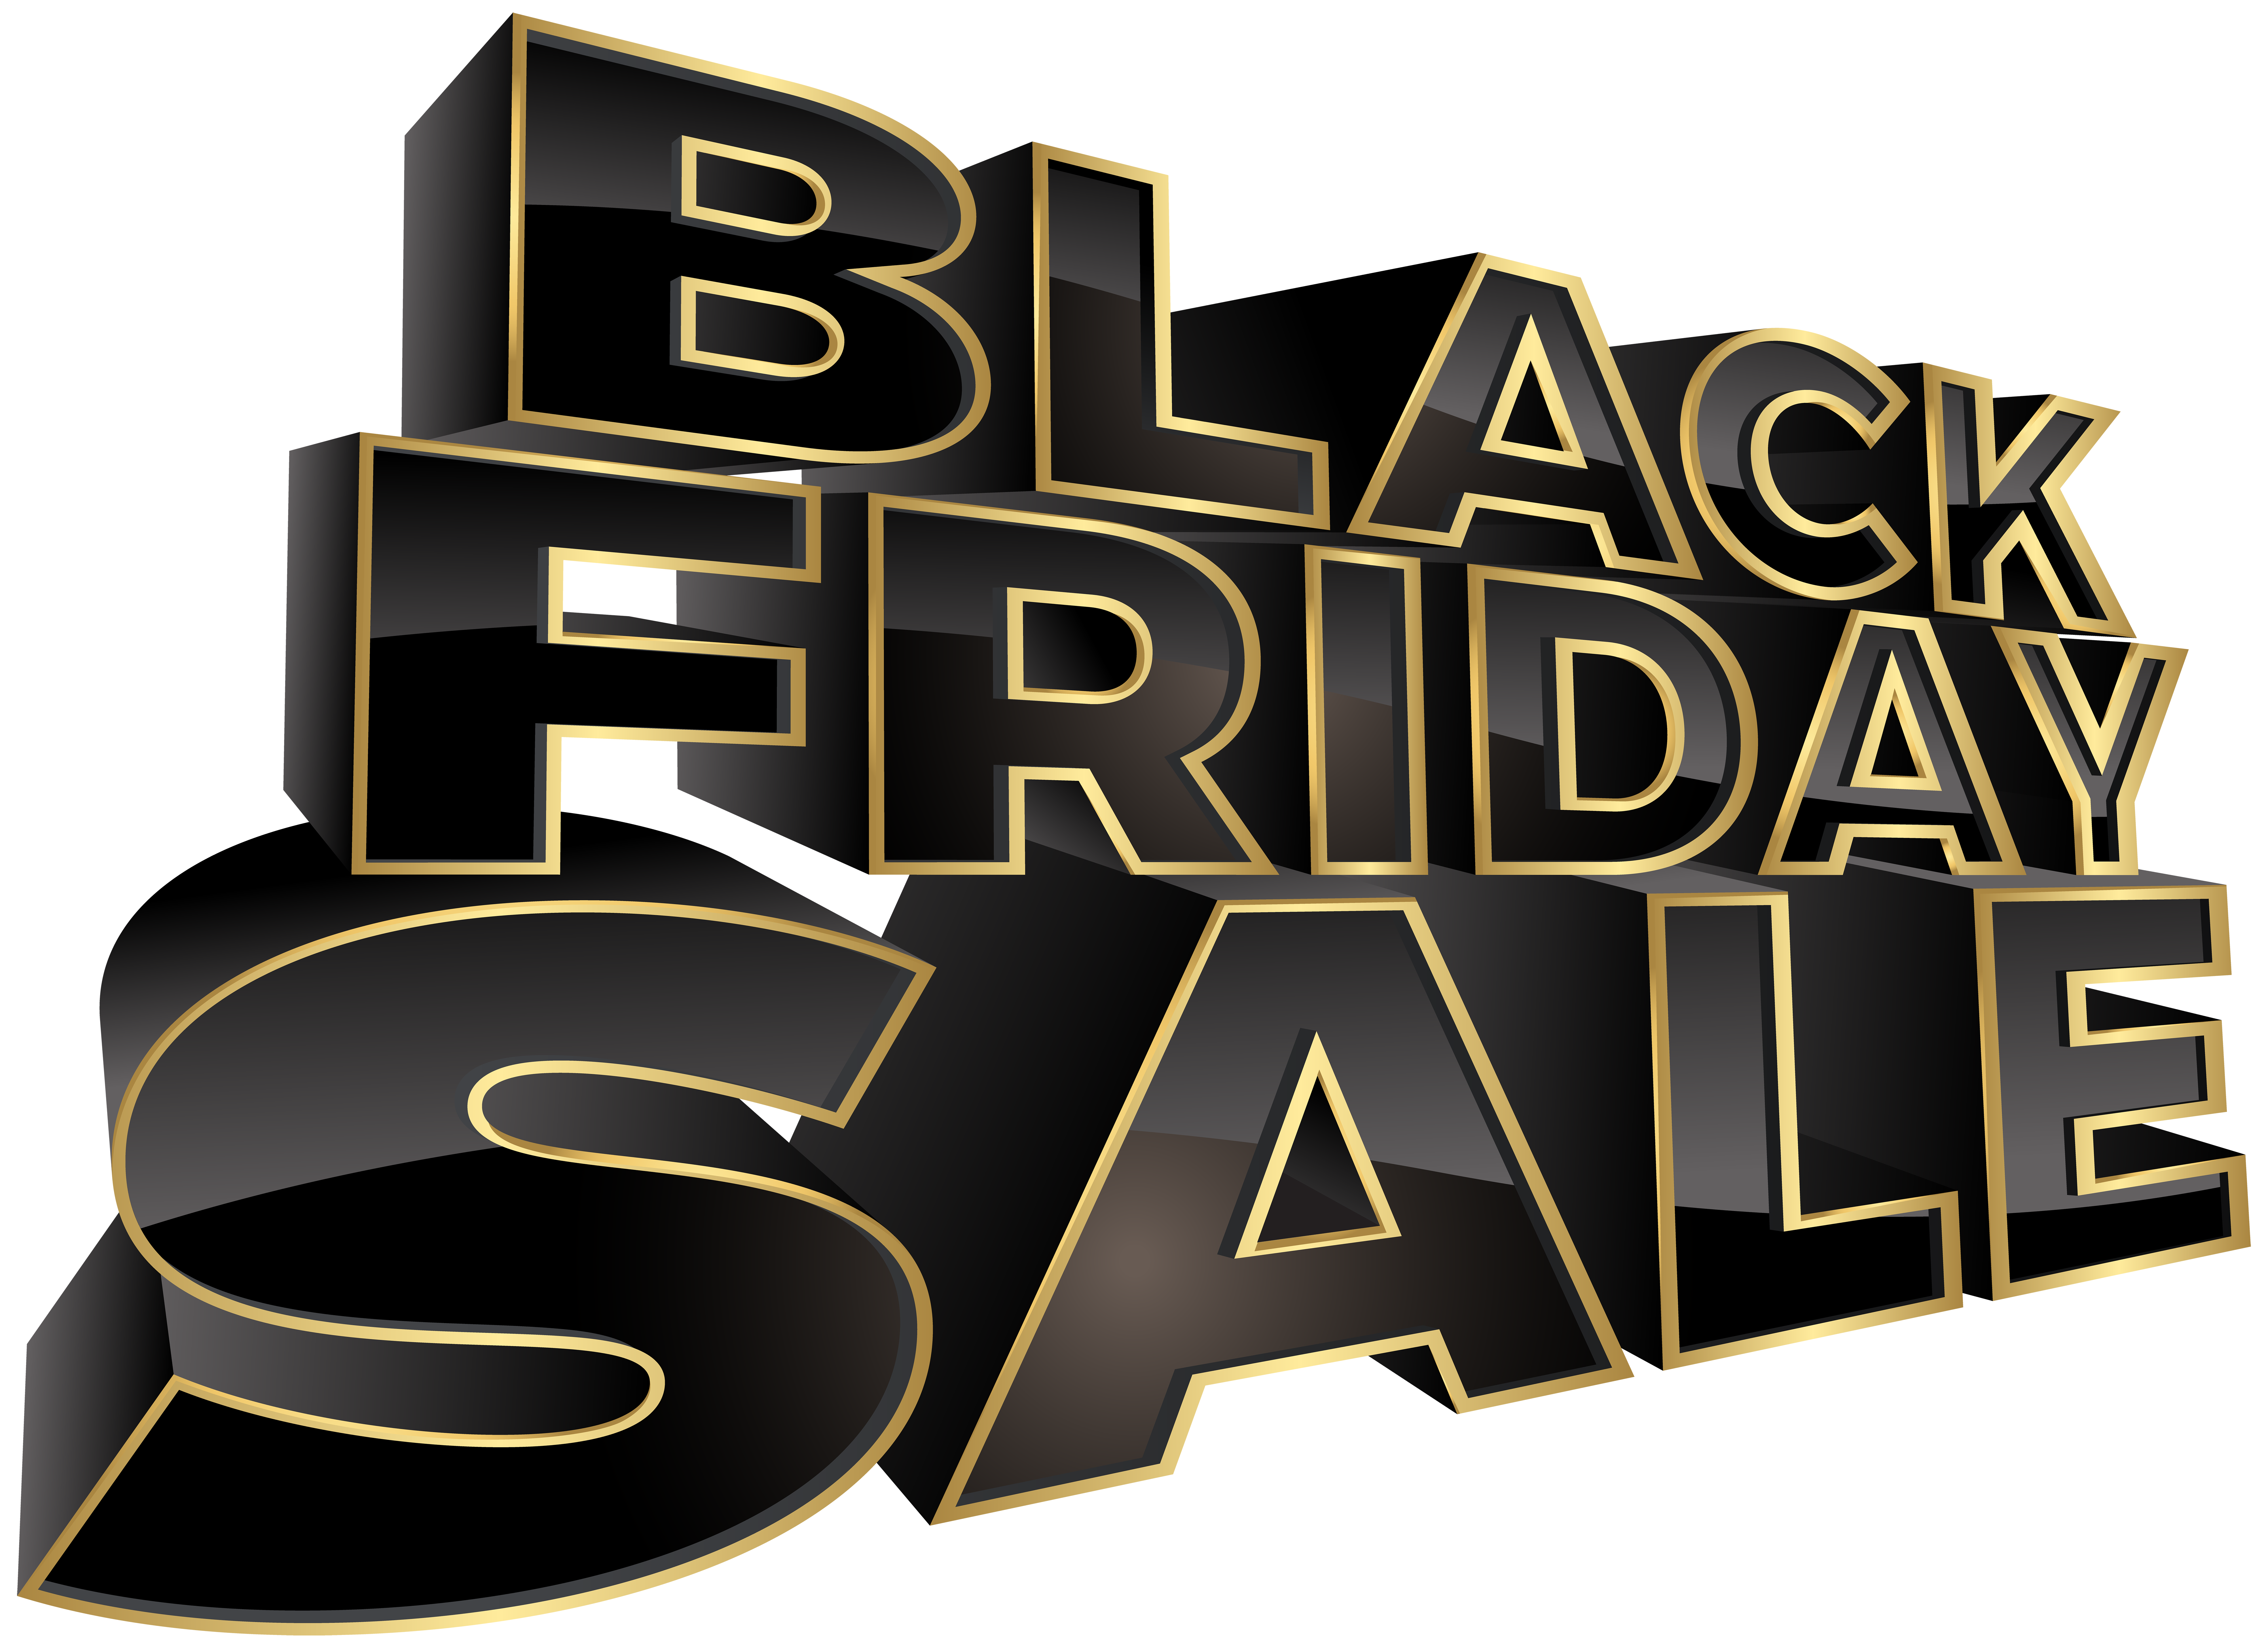 Black Friday Sale PNG Clip Art Image | Gallery Yopriceville - High